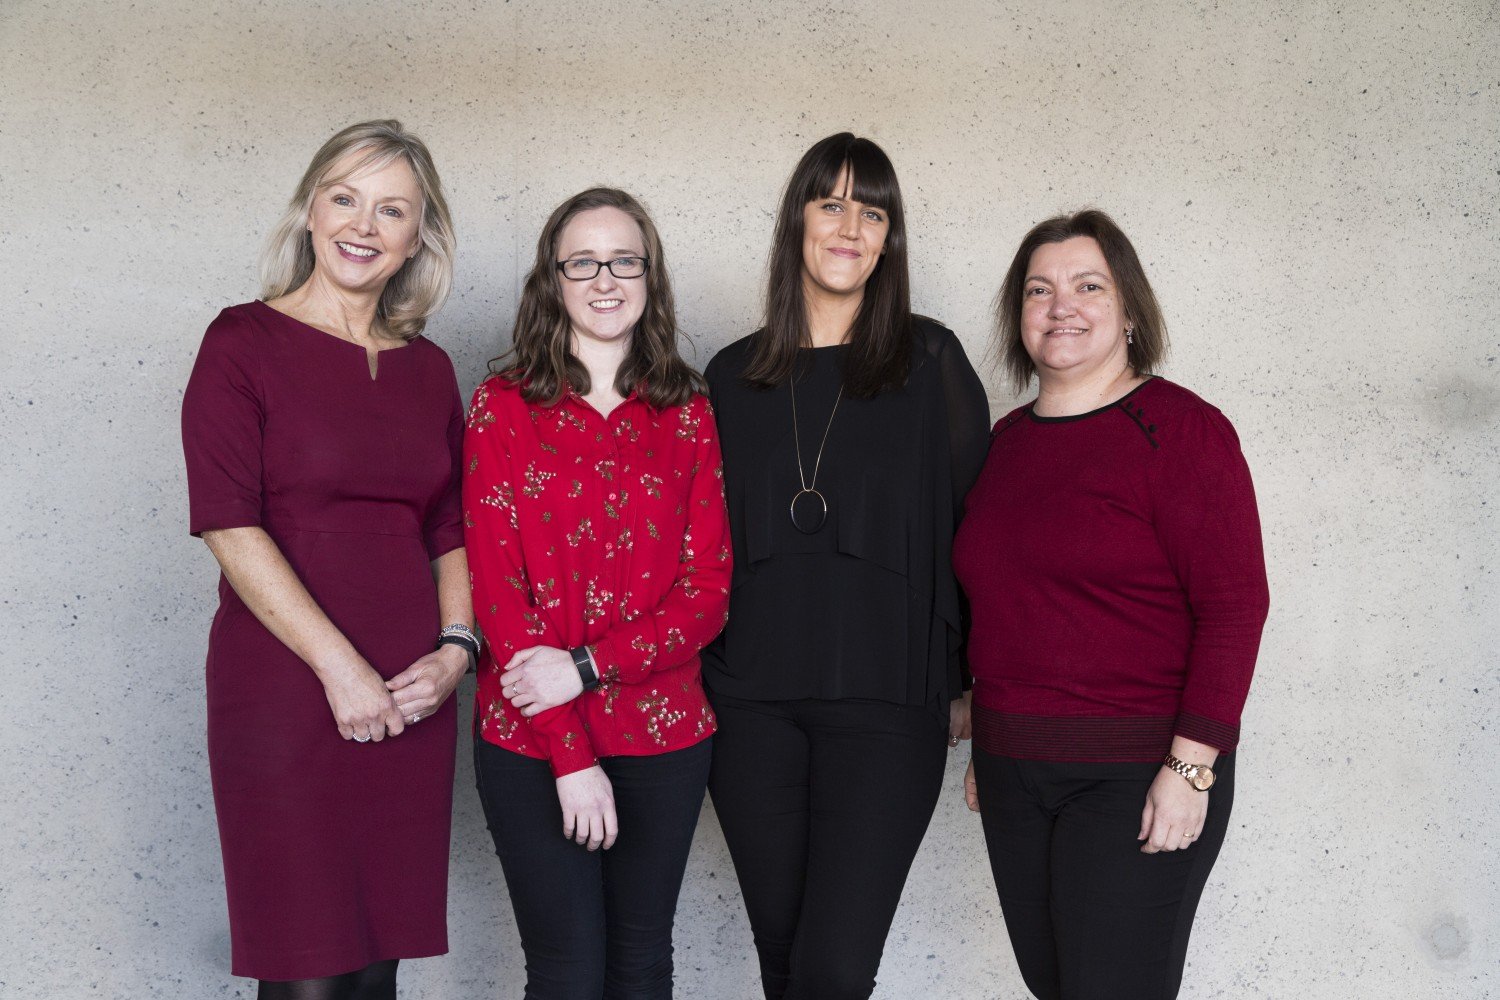 IADT Marketing team - Ruth Barry, Claire Roberts, Ruth Wilkinson and Elena Somoza